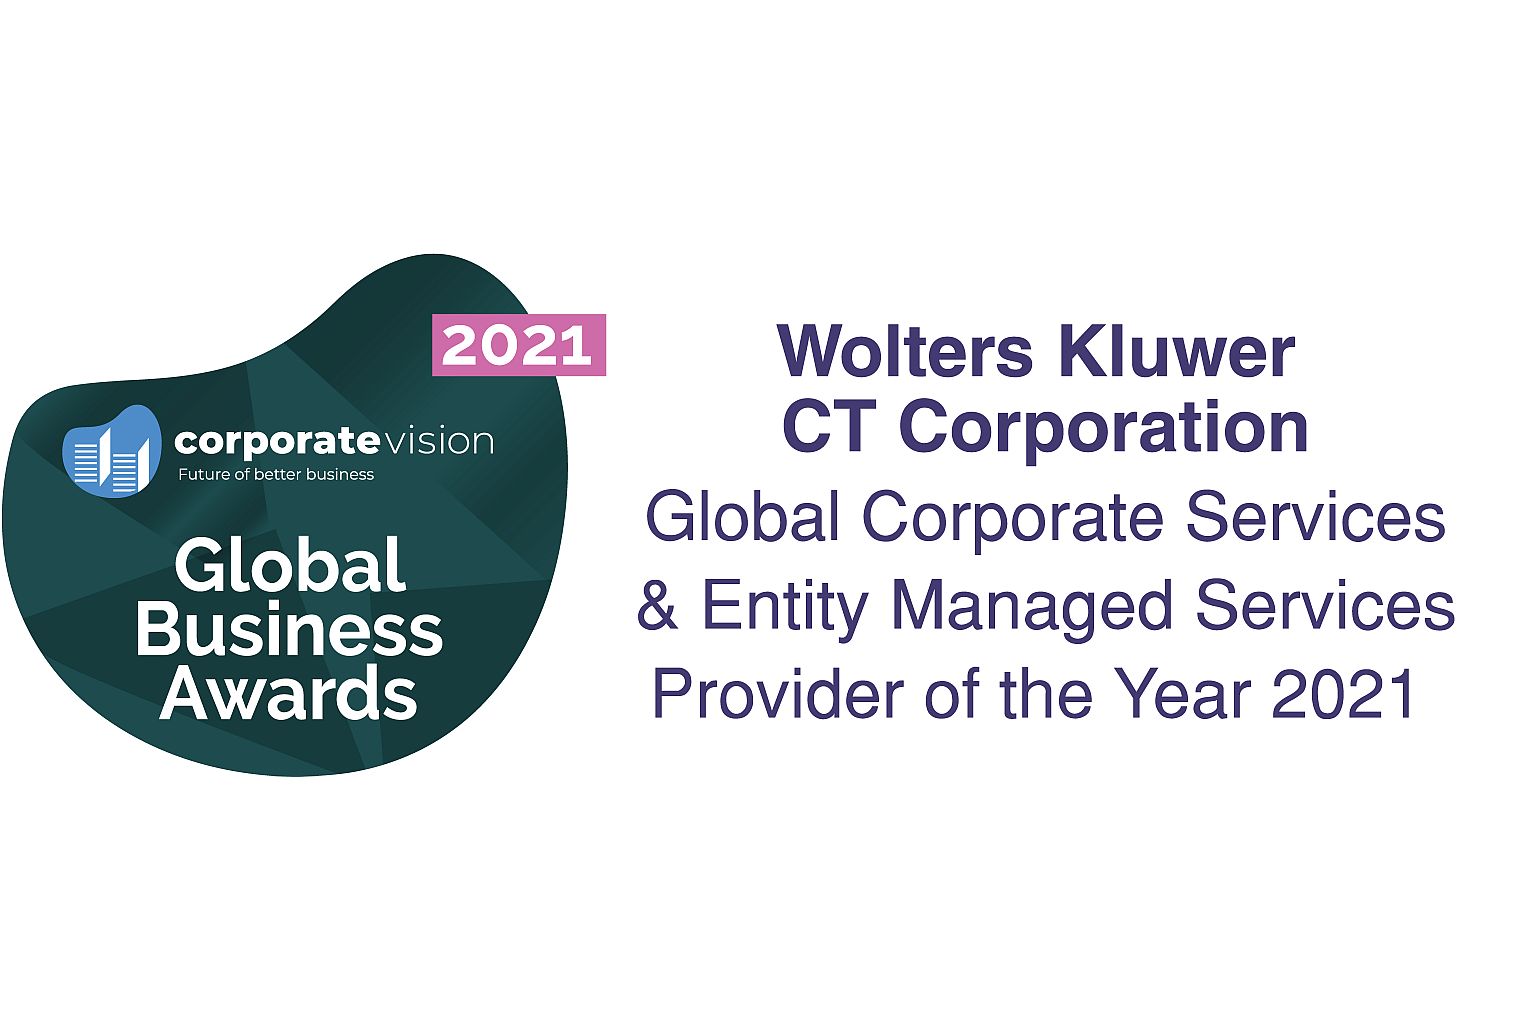 CT Corporation's Global Corporate Services and Entity Managed Services win award